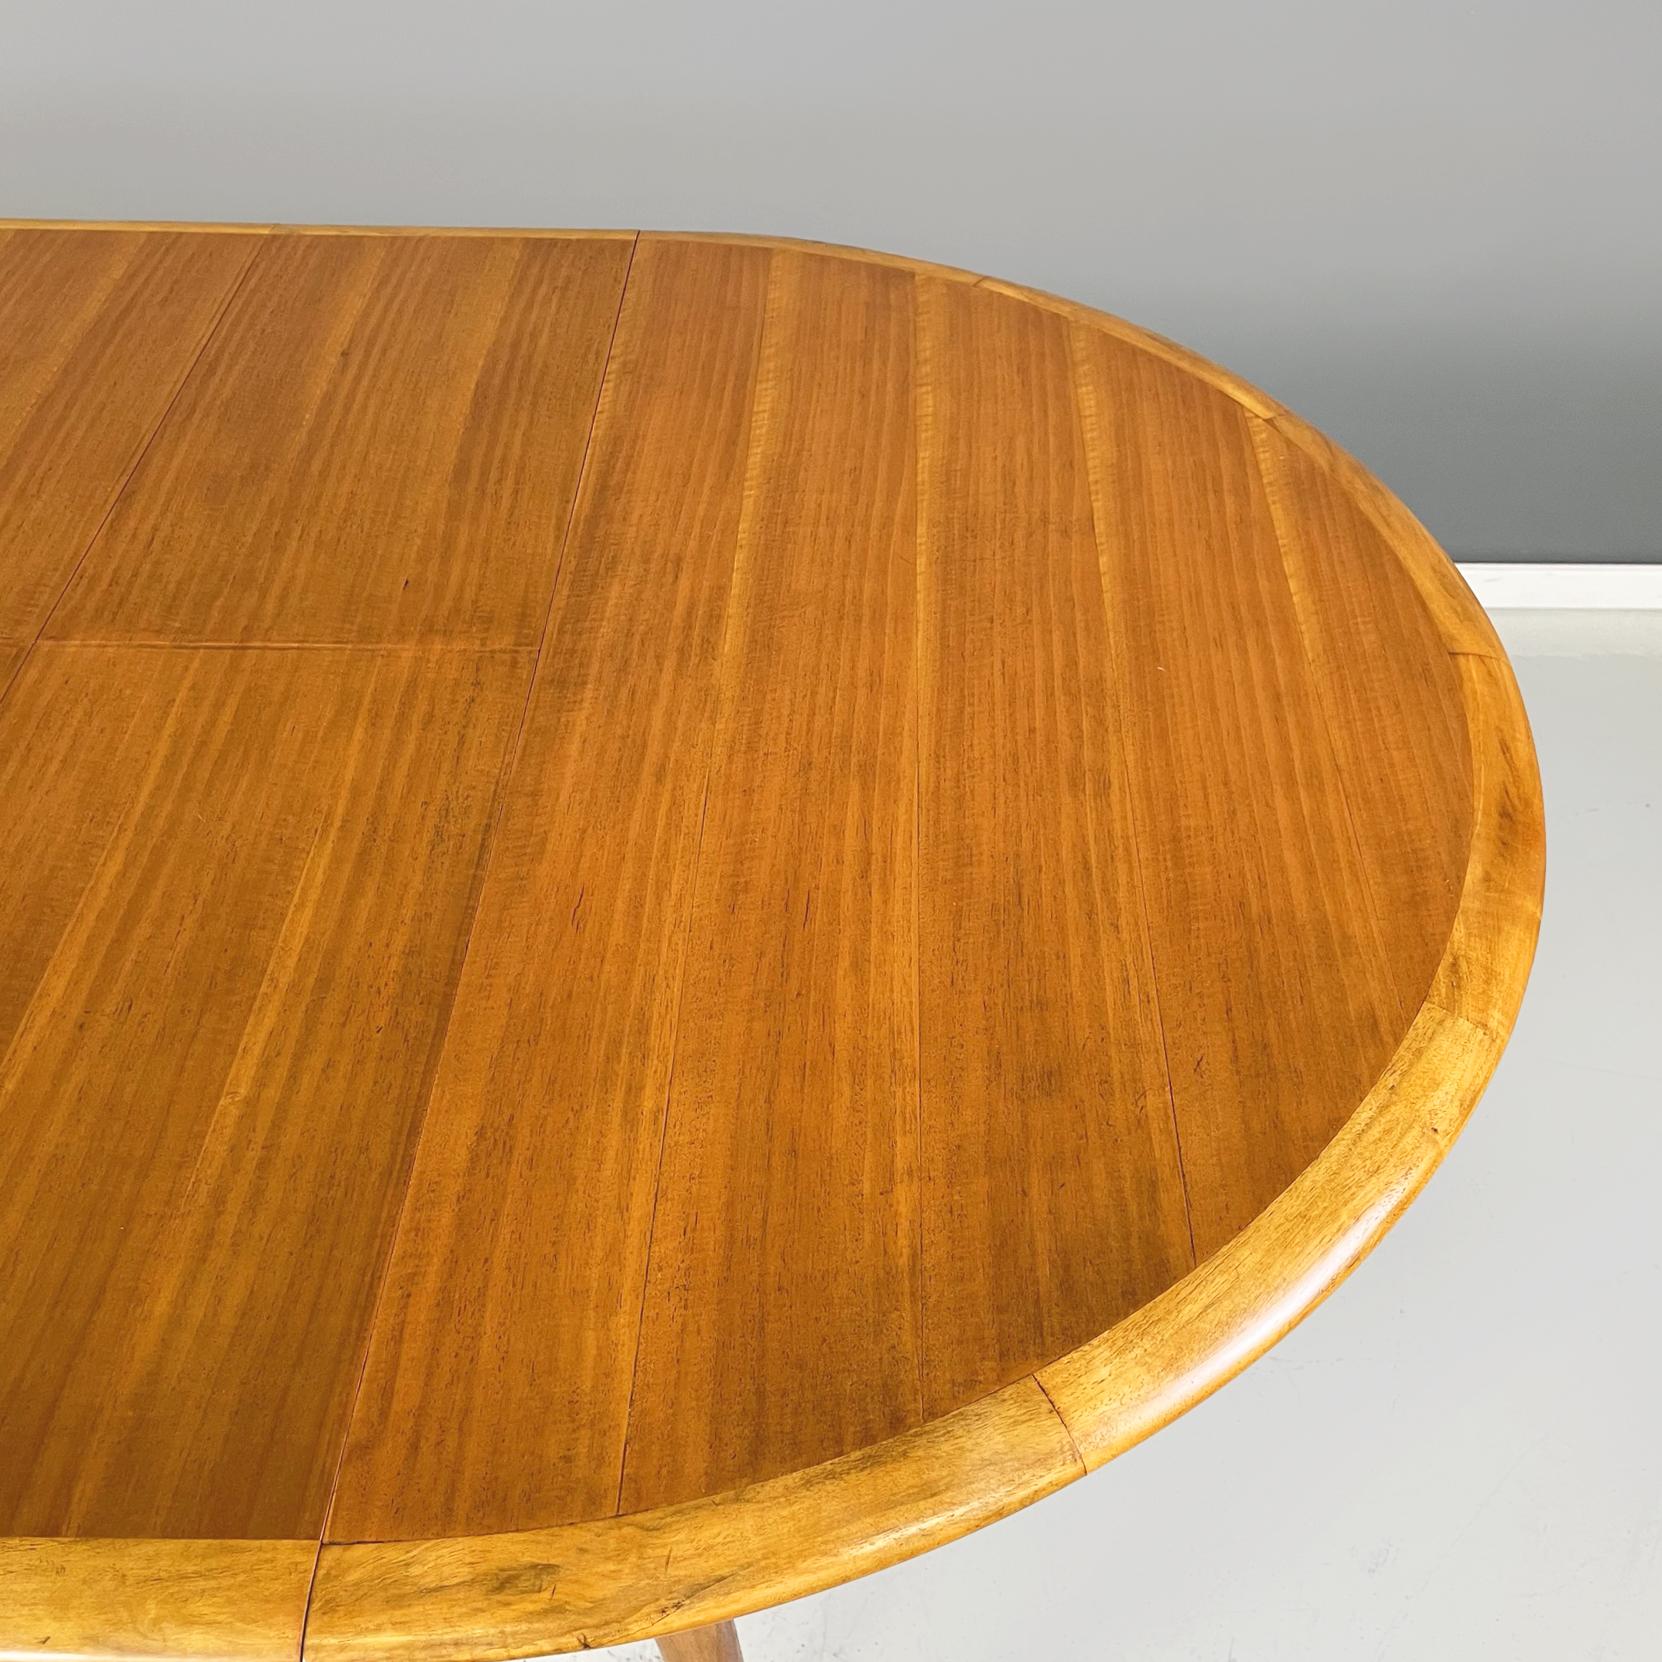 North Europa Midcentury Oval Round Wooden Dining Table with Extensions, 1960s For Sale 2